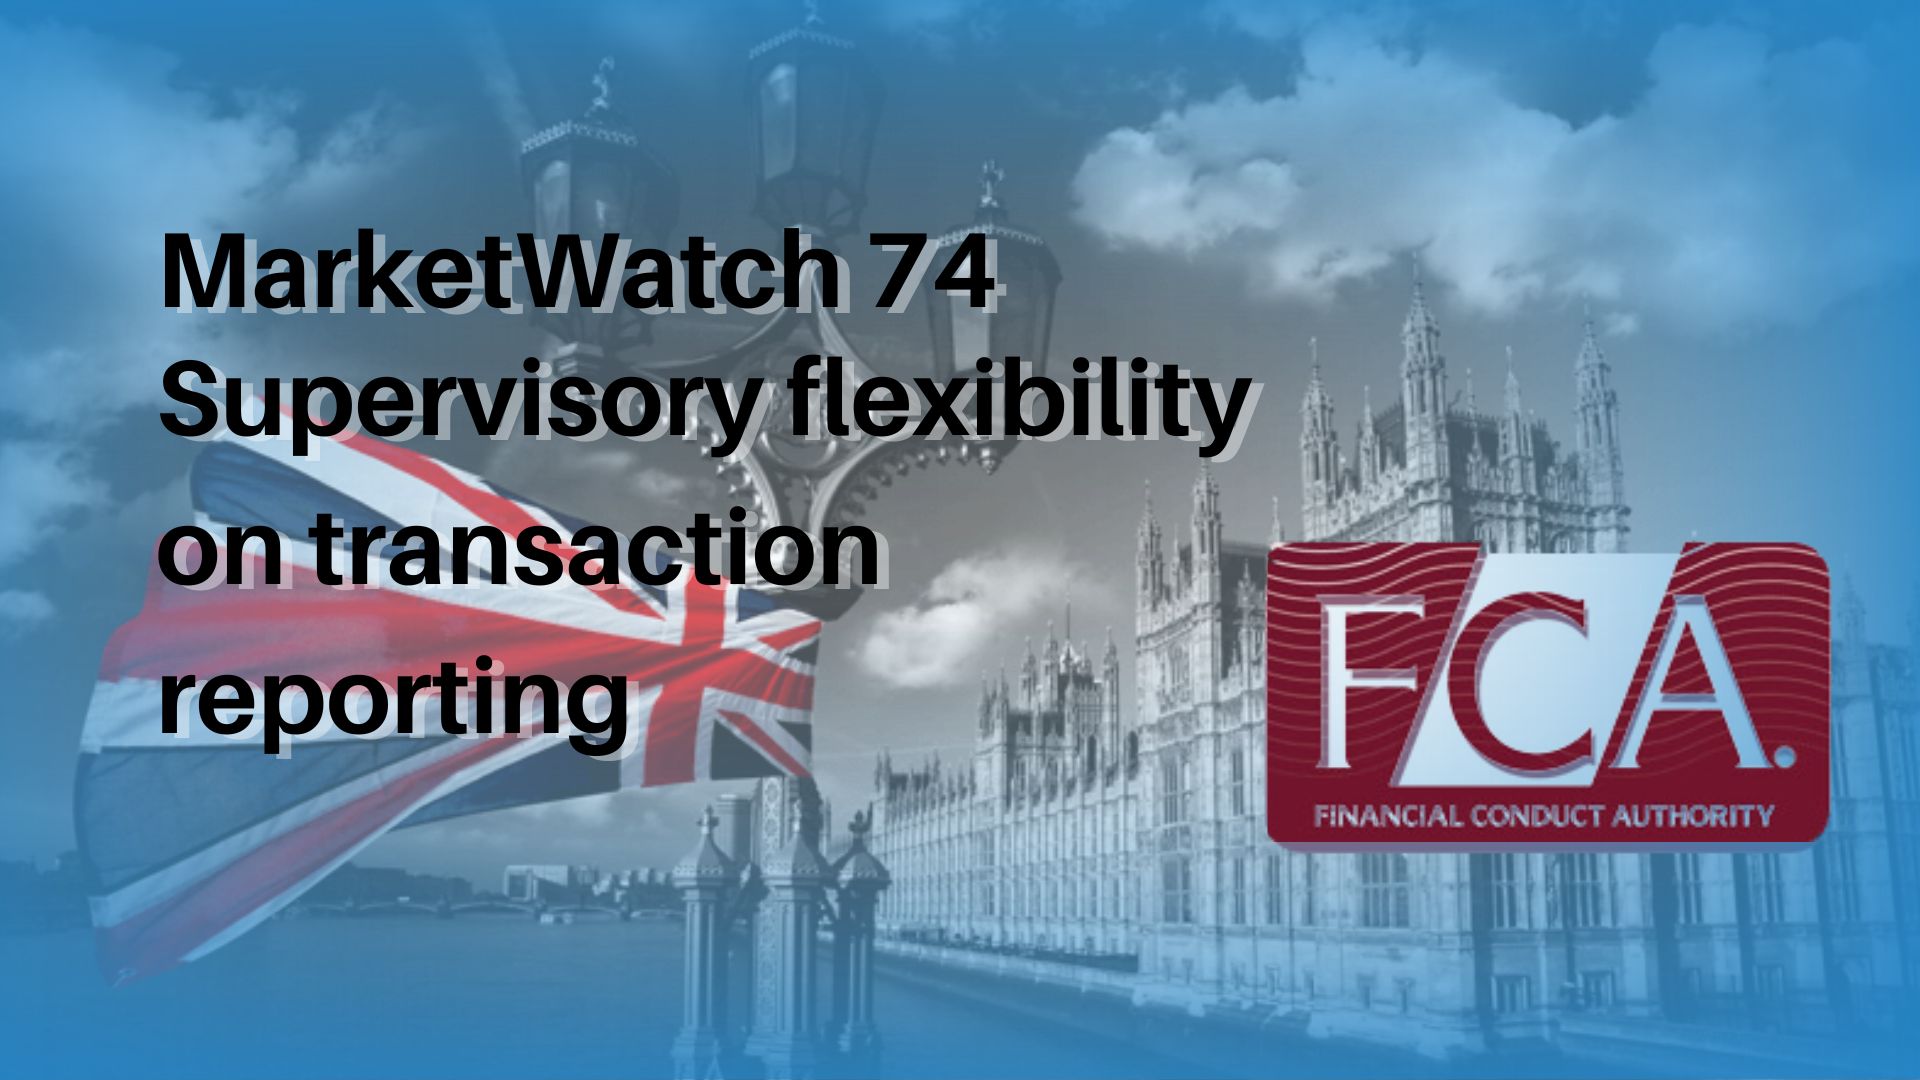 FCA MarketWatch 74 and Supervisory flexibility on transaction reporting